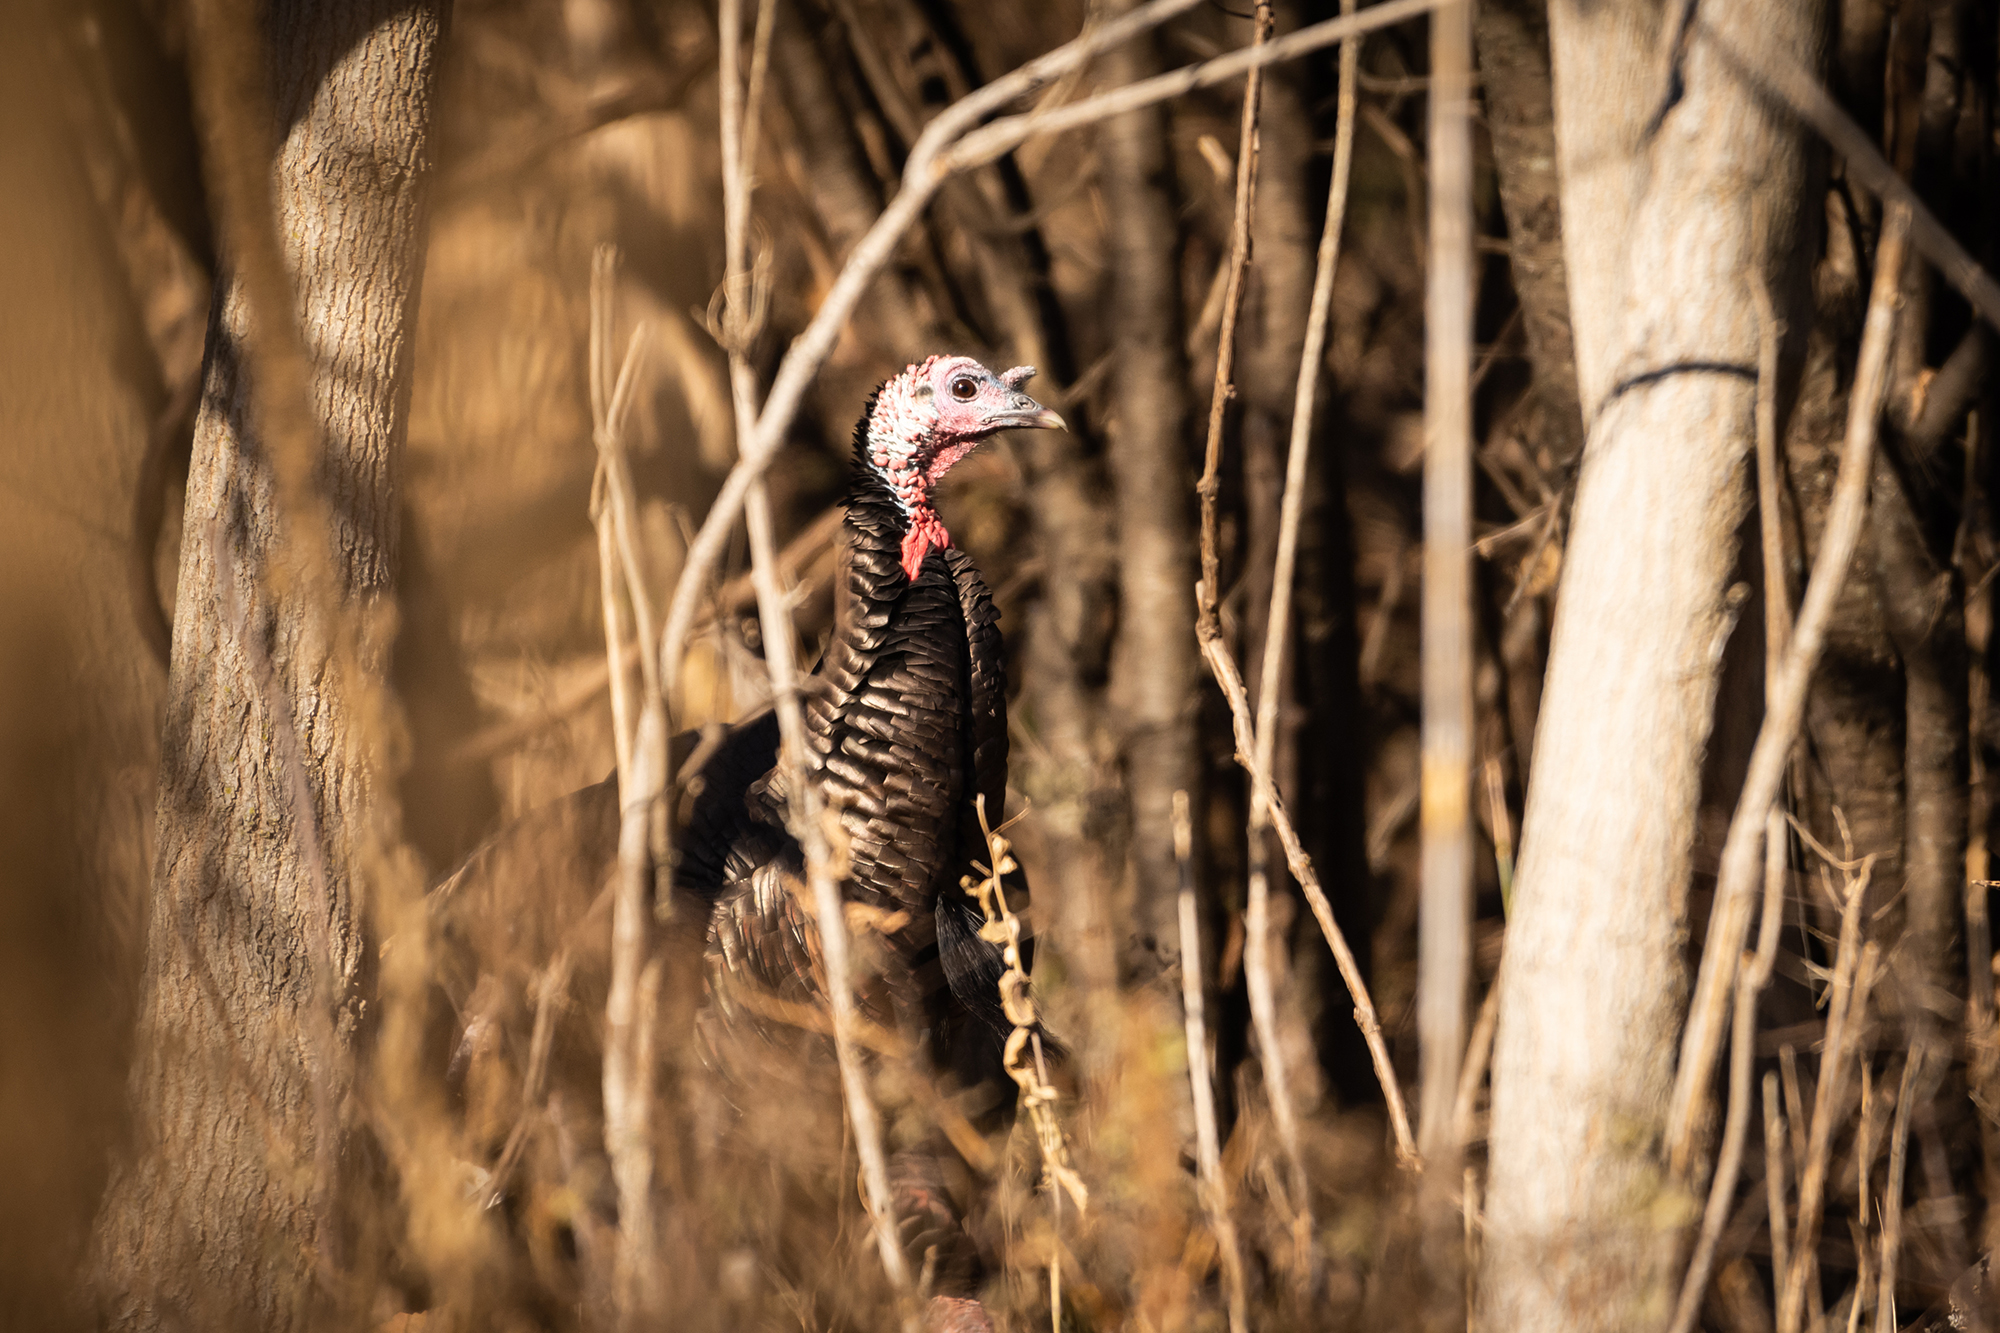 The turkey population decline can be linked to habitat changes.